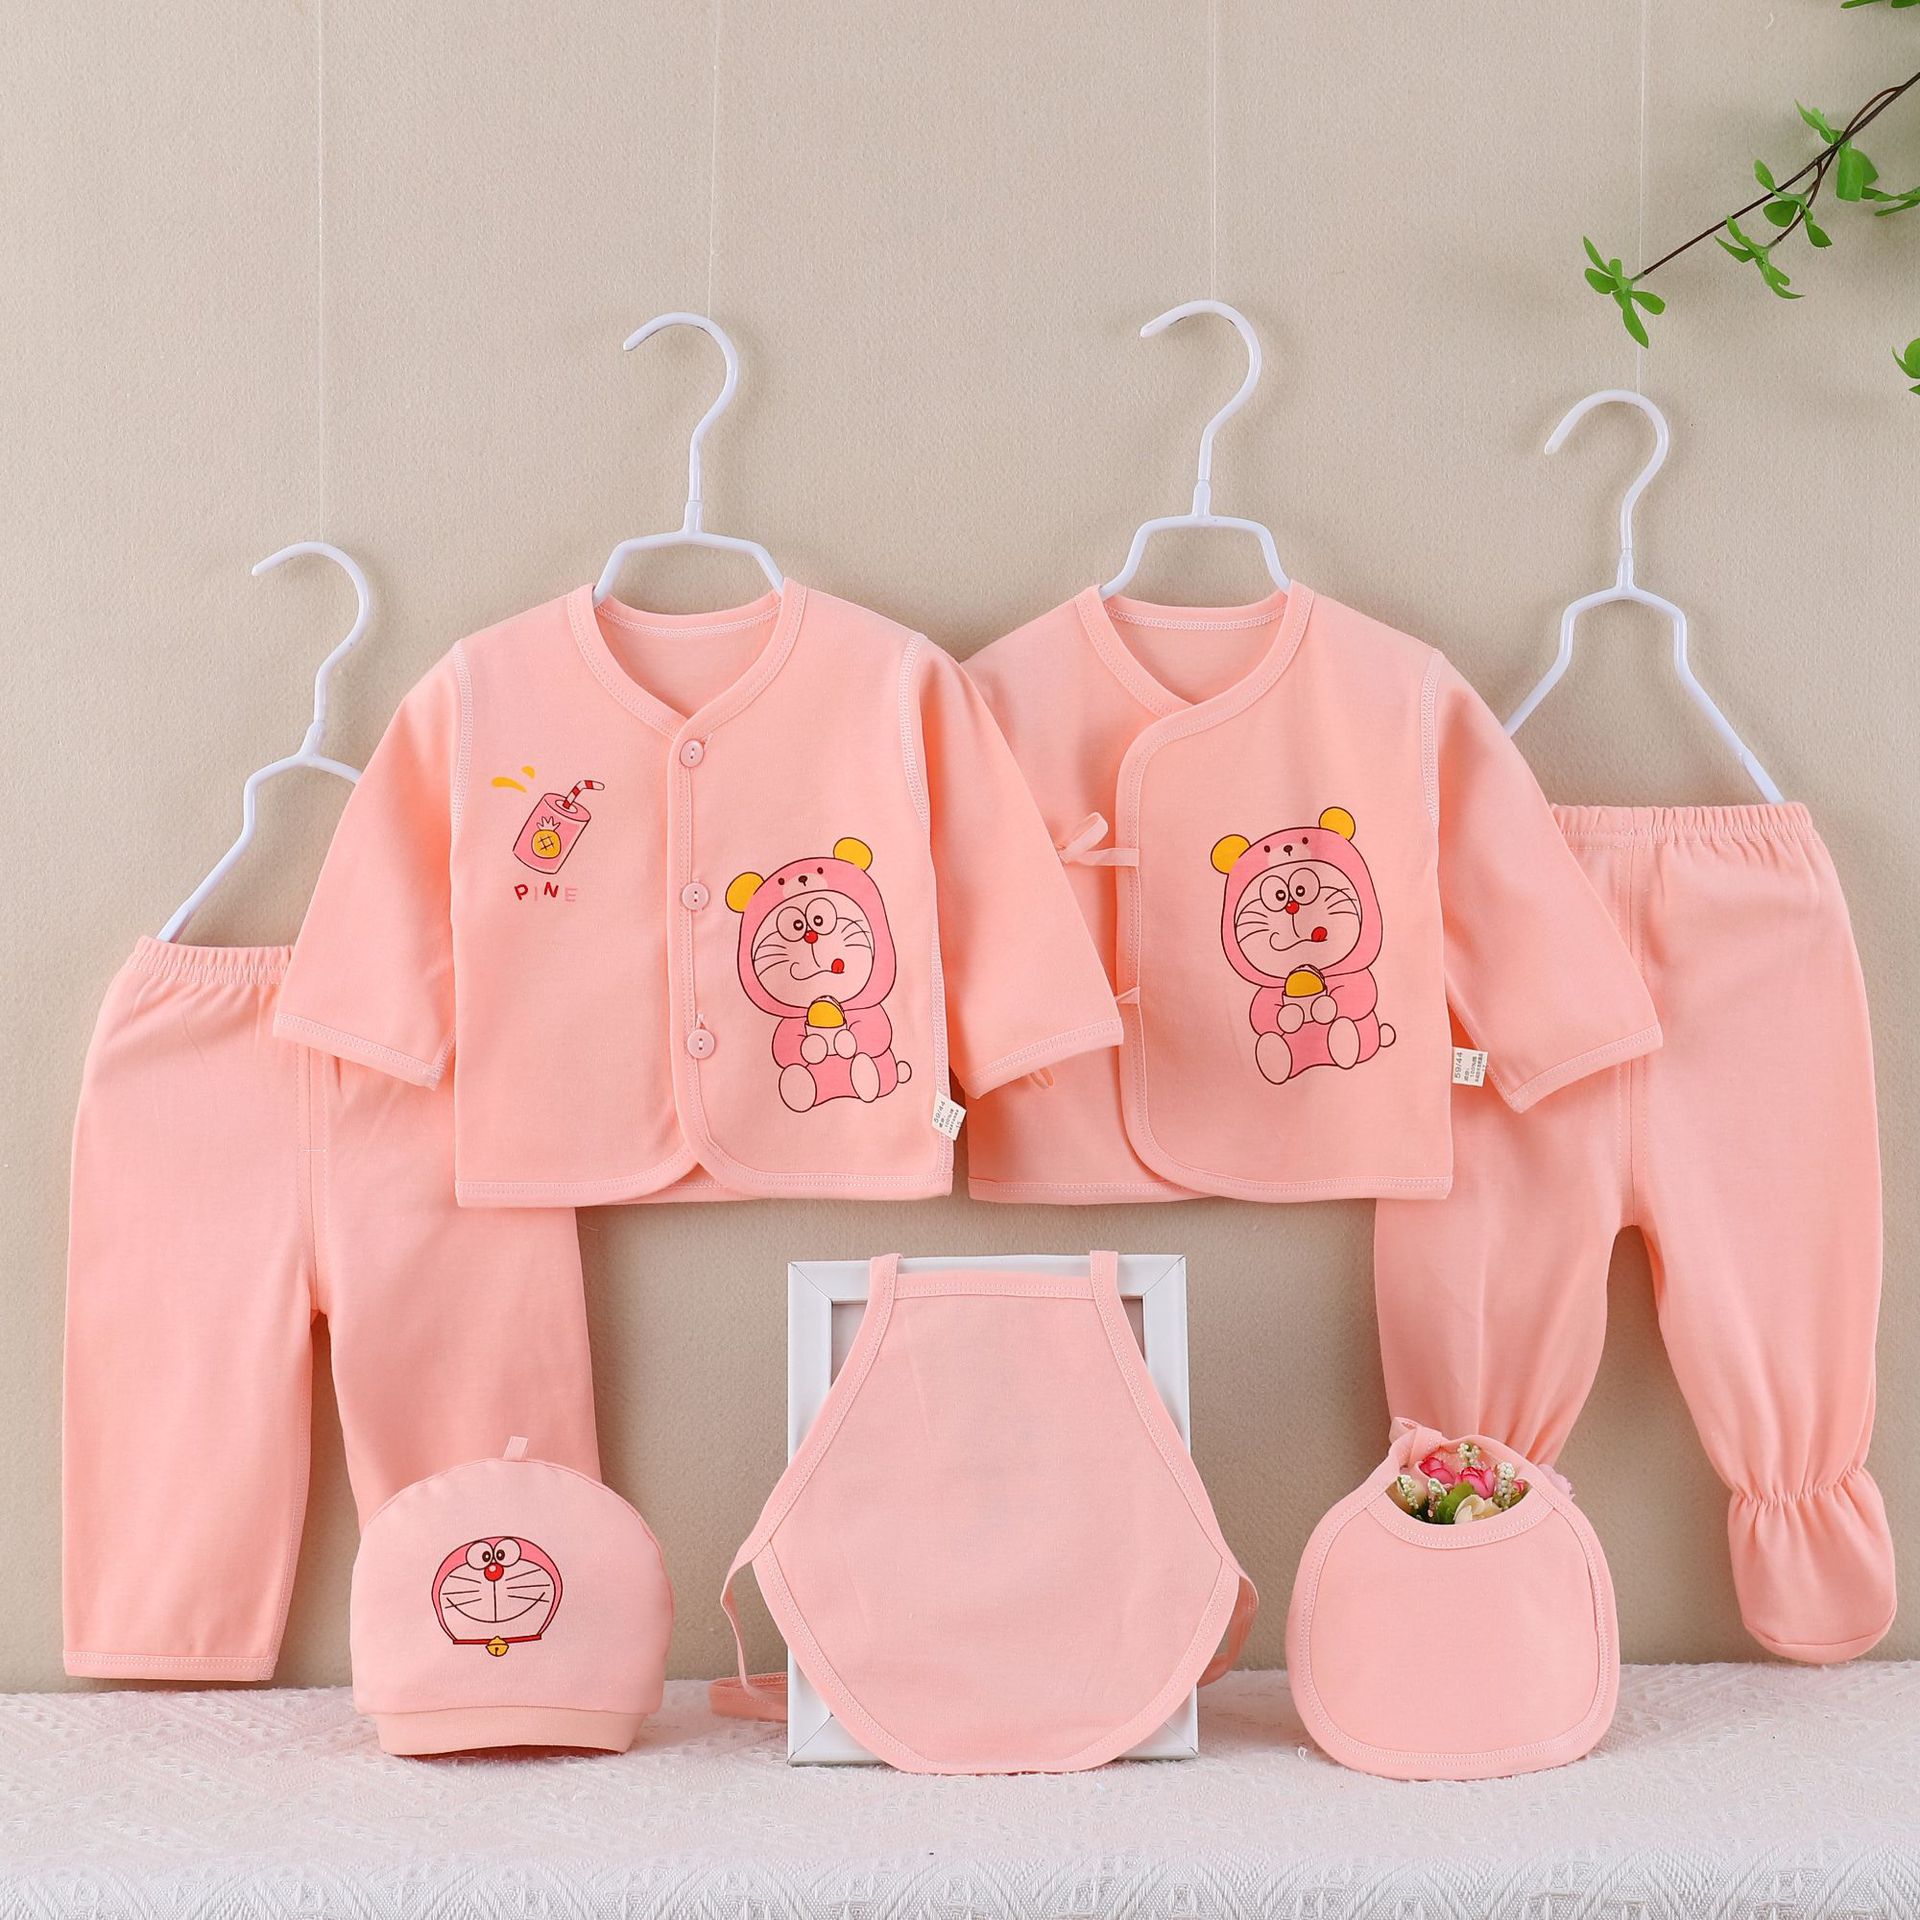 Newborn Boneless Cotton Clothes Baby 7 Pieces Suit 0-3 Months Spring, Autumn and Summer New Born Newly Born Baby Supplies